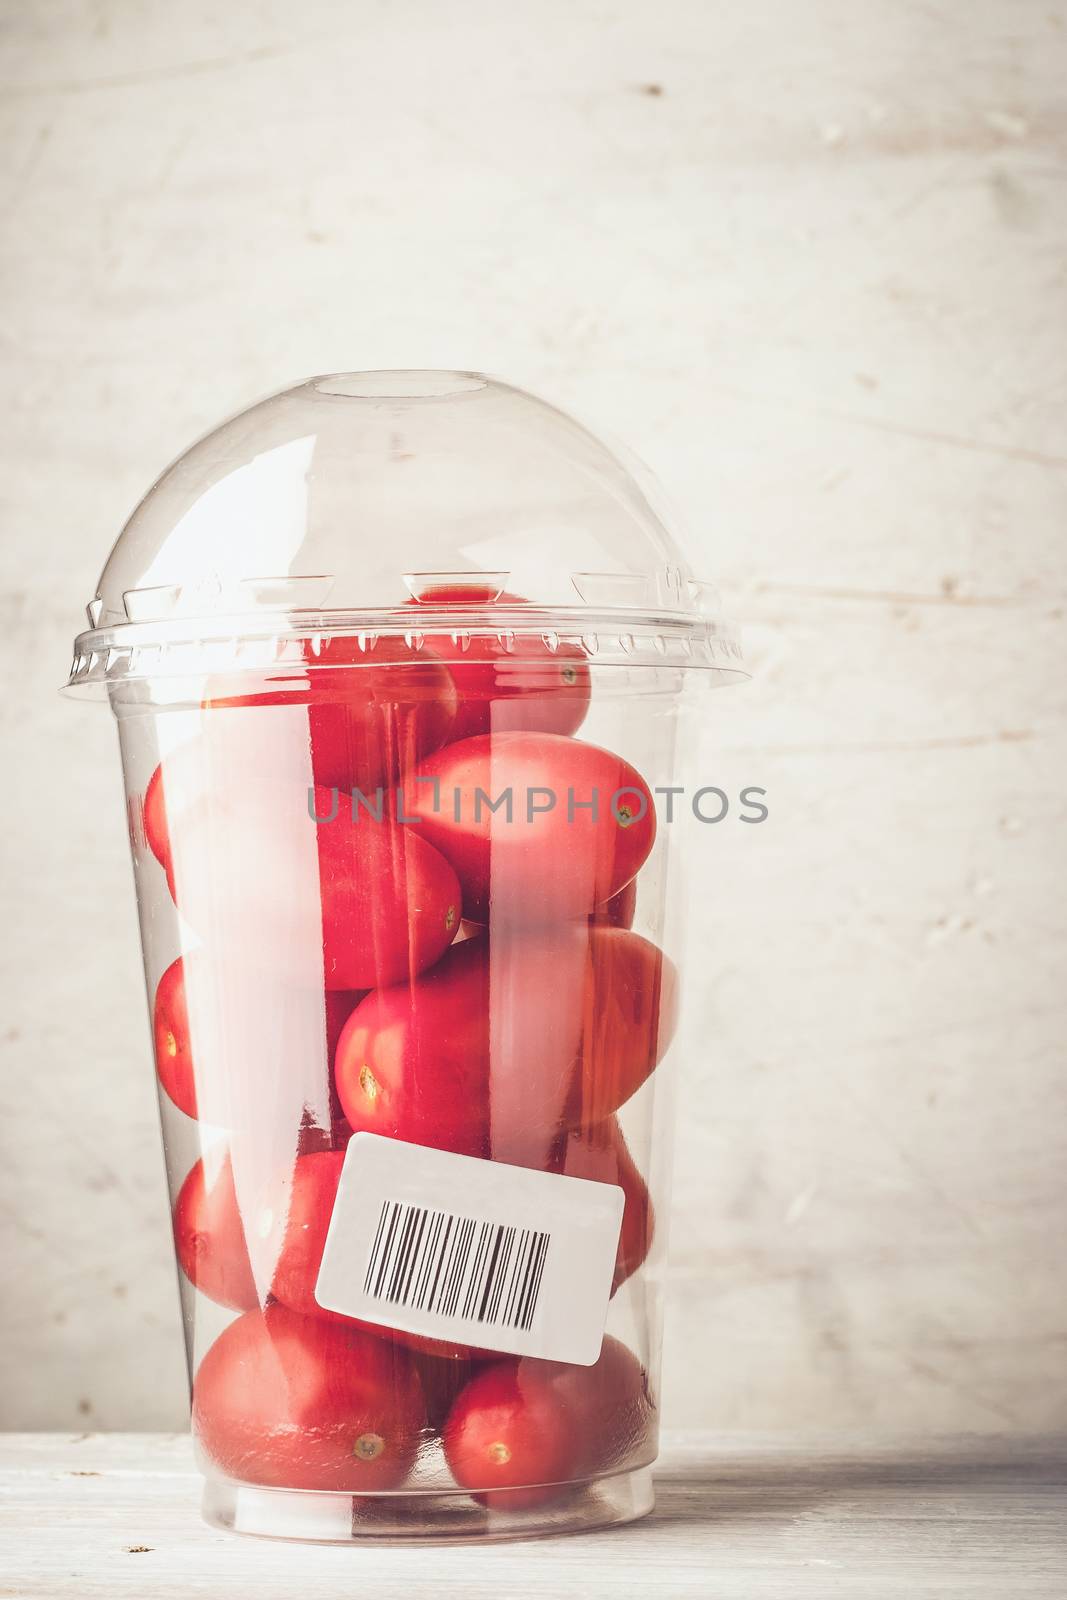 Tomatoes in the plastic package vertical